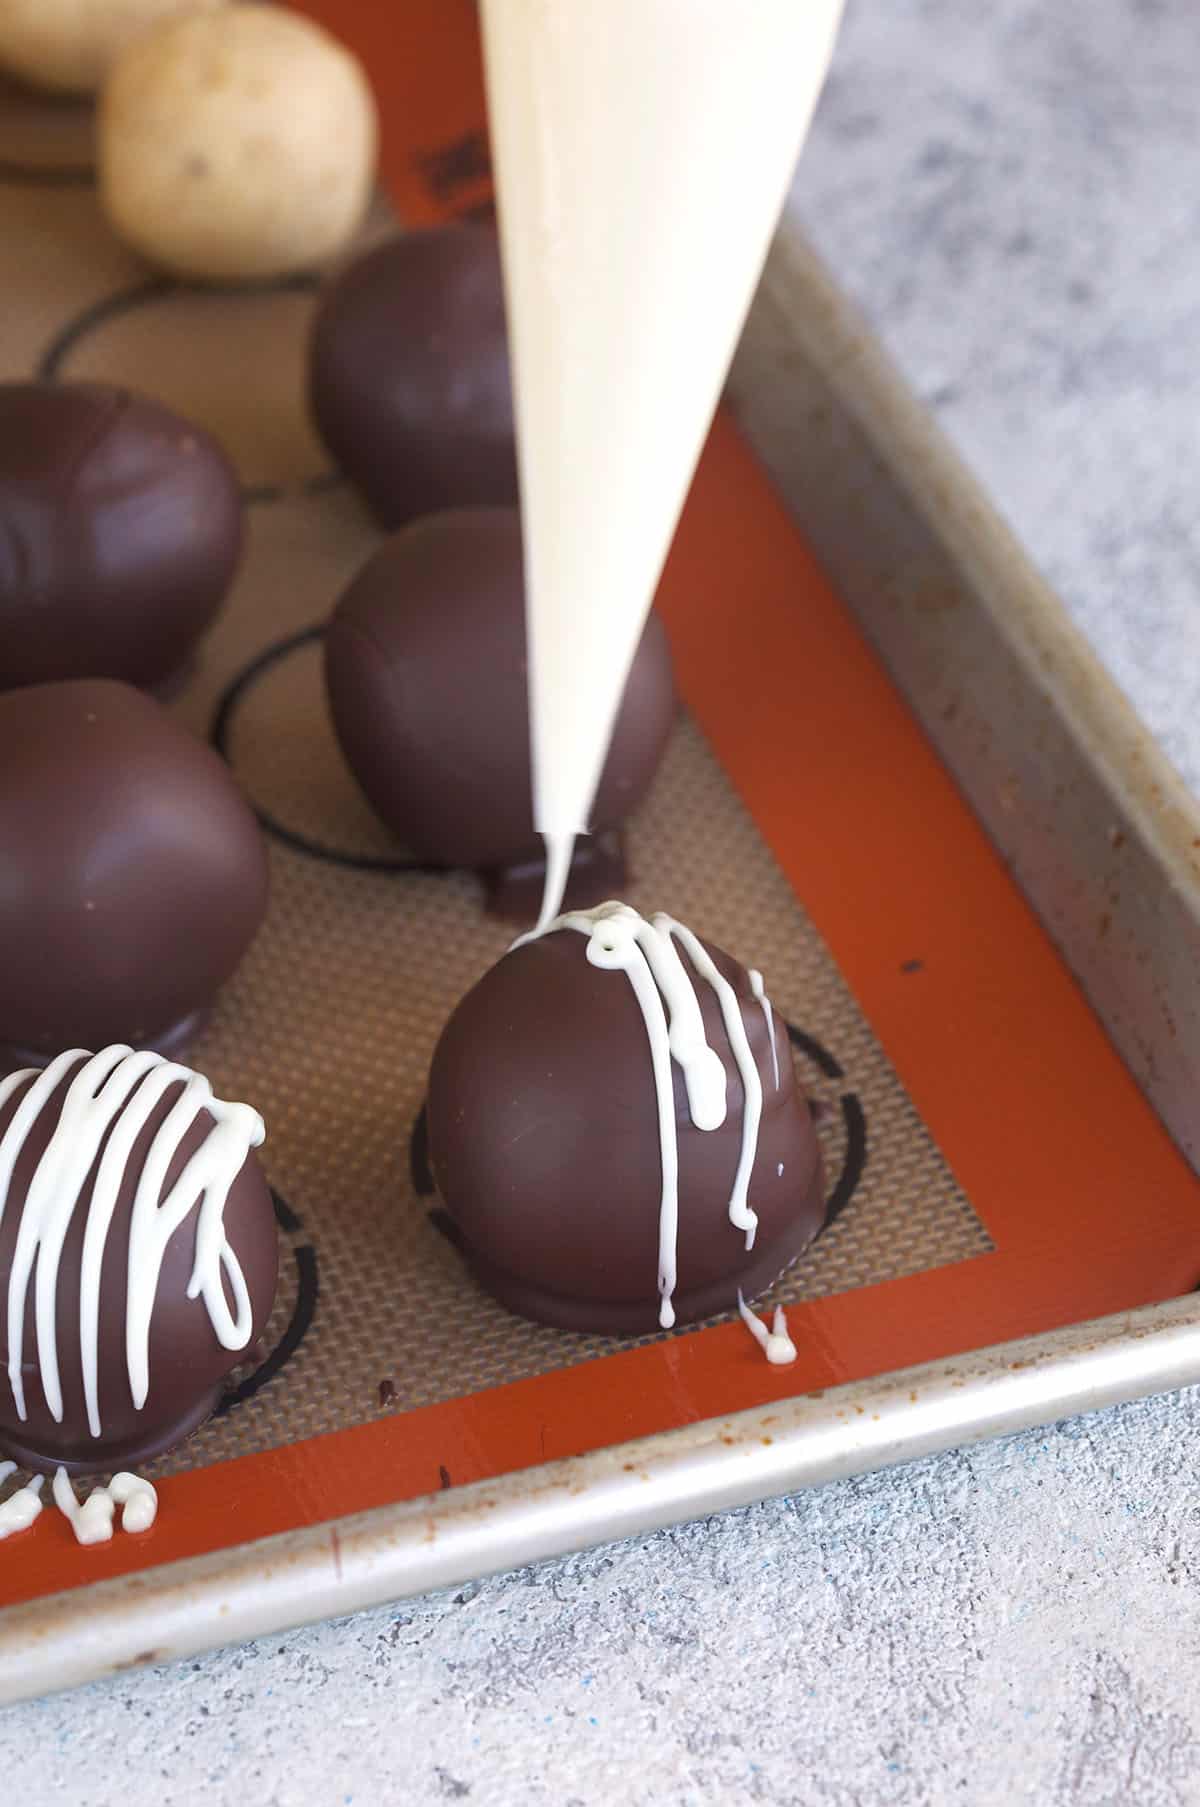 White chocolate is being drizzled over a peanut butter ball.